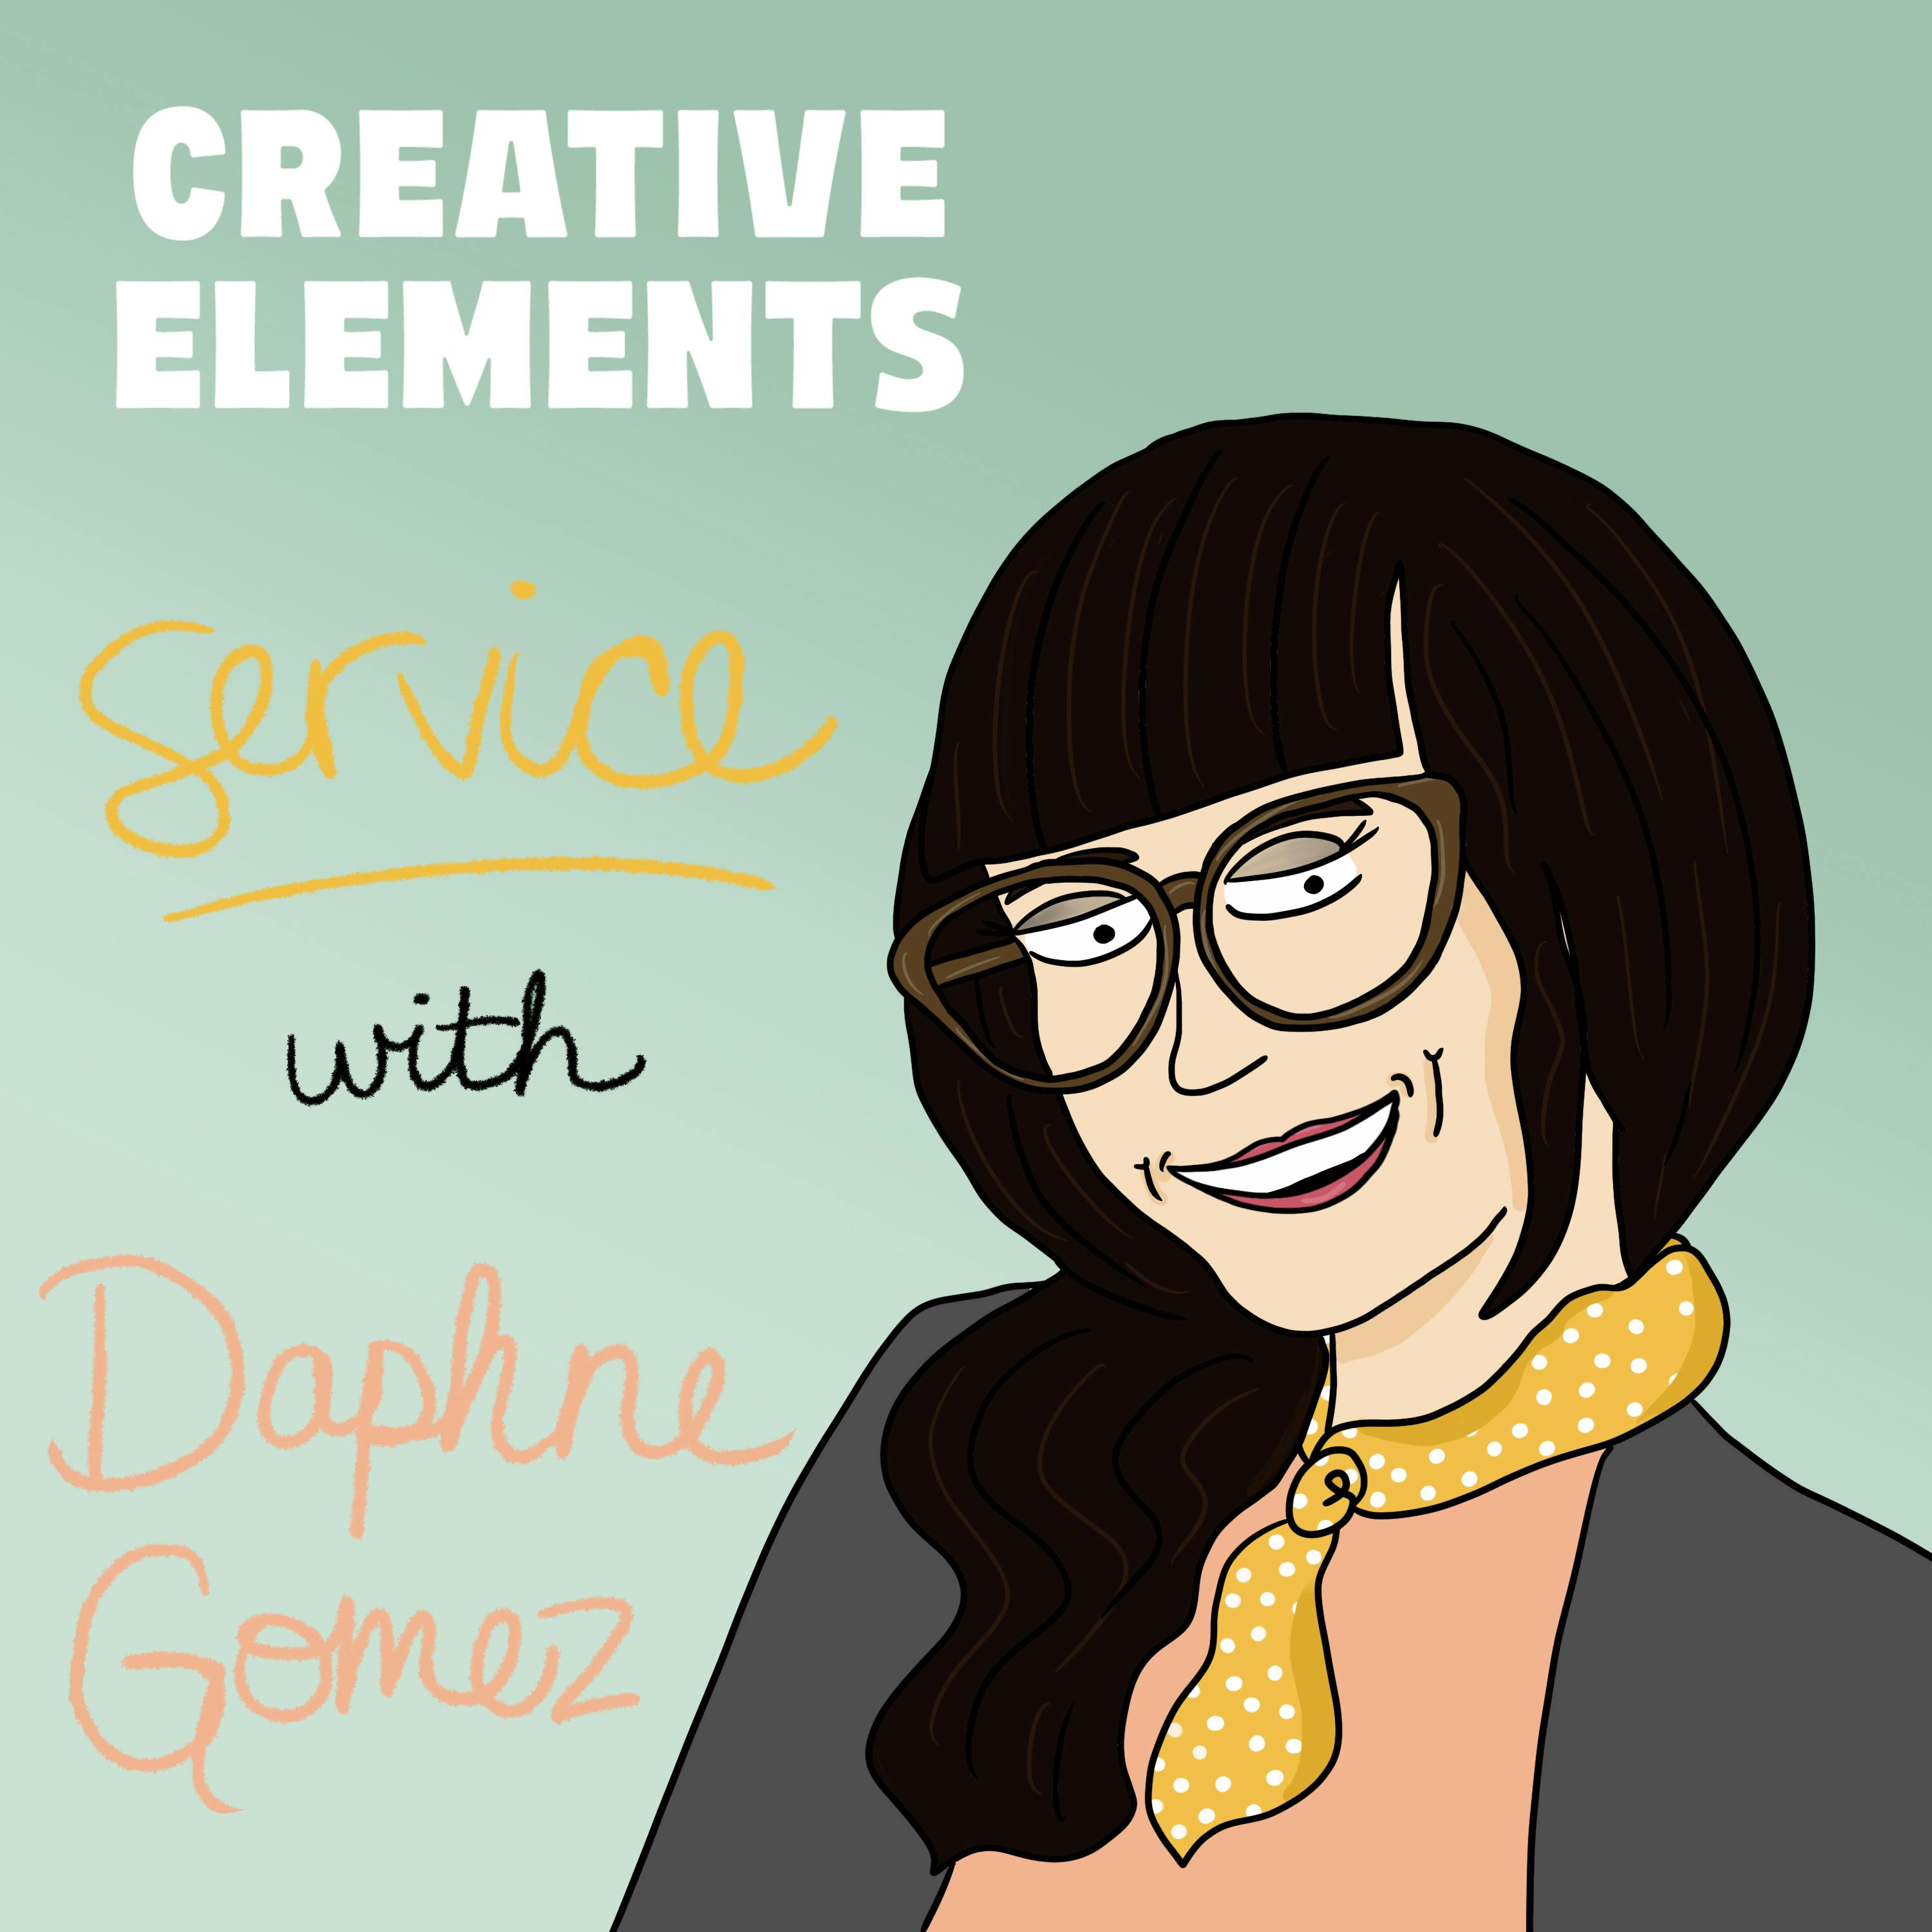 #105: Daphne Gomez [Service] – Leaning into rapid growth and finding rapid growth on Instagram